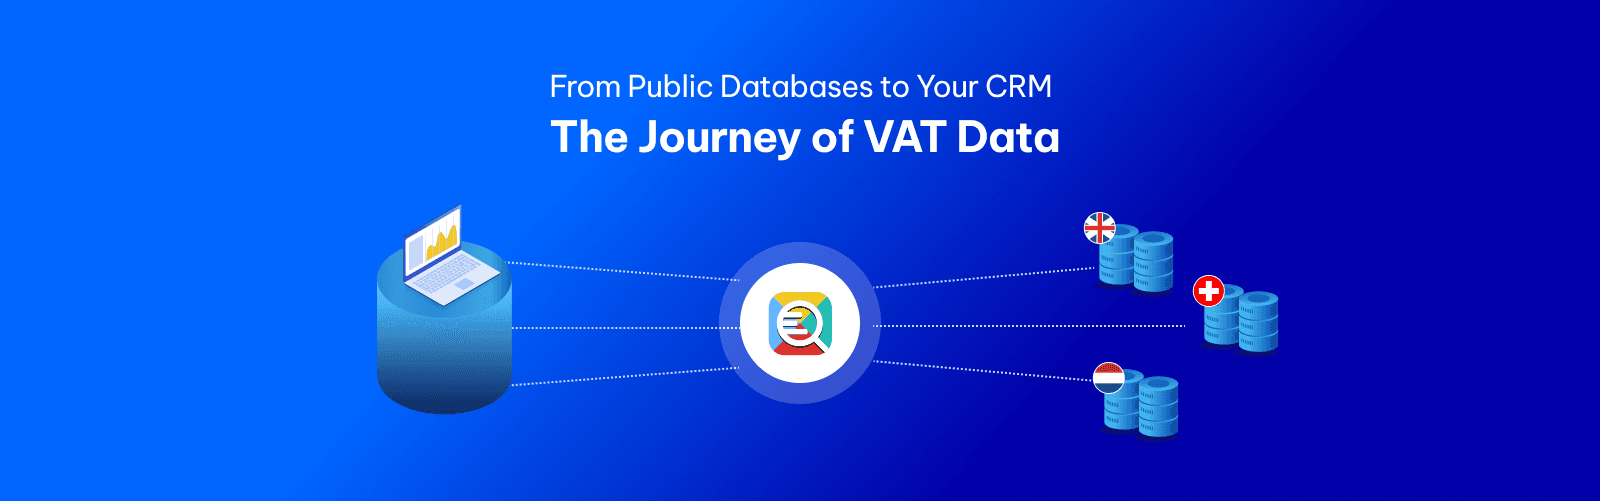 From Public Databases to Your CRM